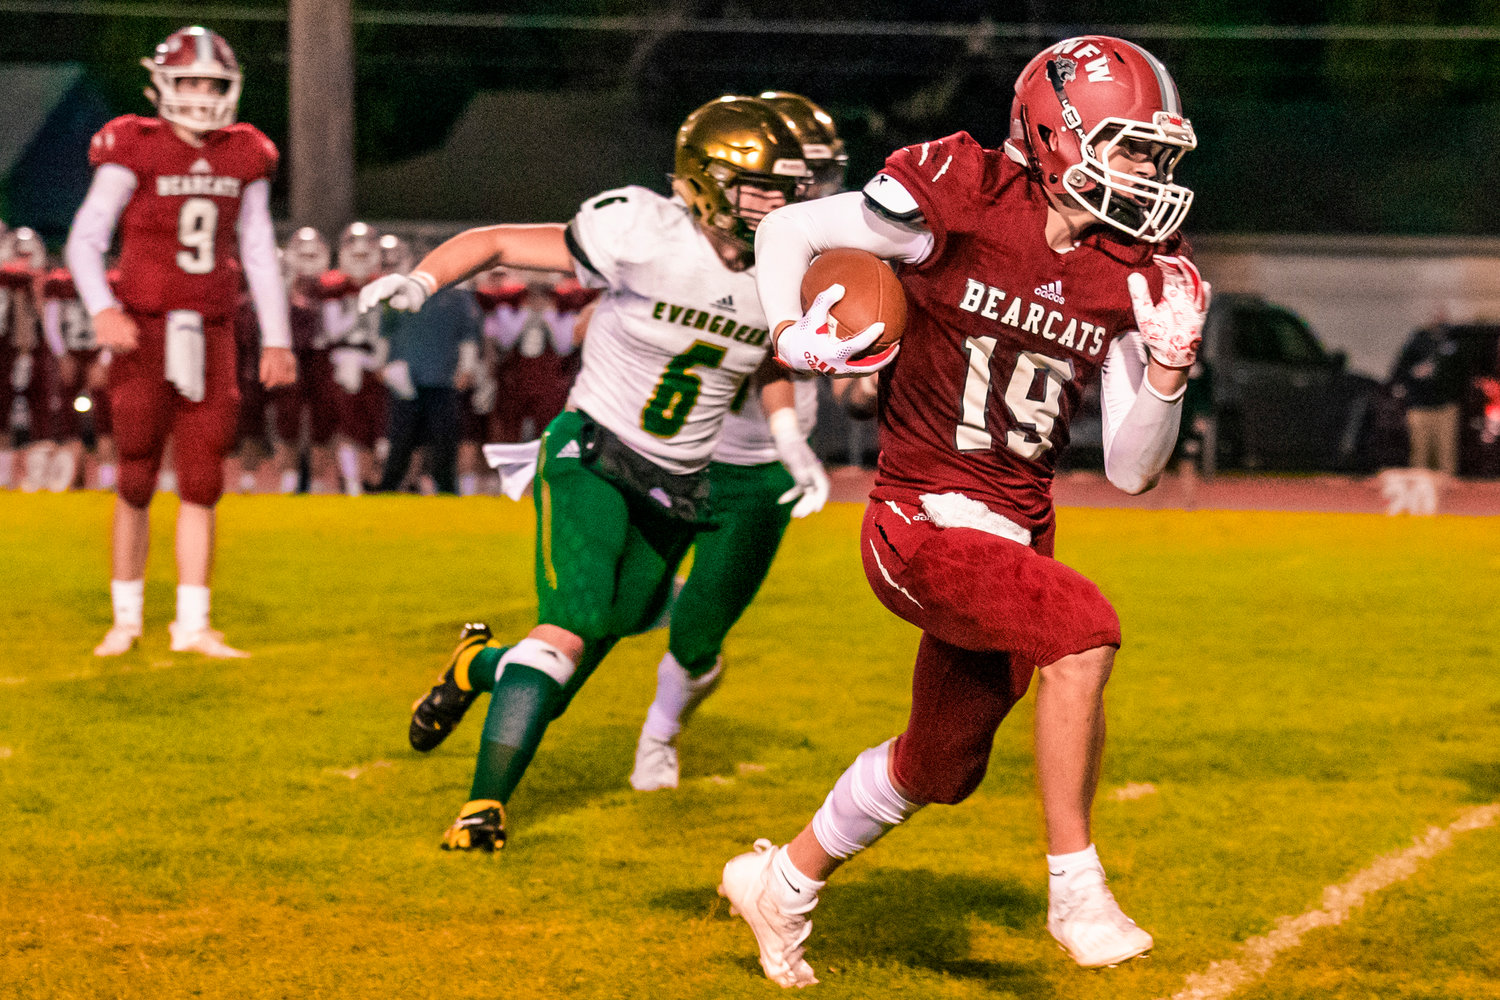 W.F. West’s Gage Brumfield (19) runs past defenders during a game against Evergreen in Chehalis on Friday.